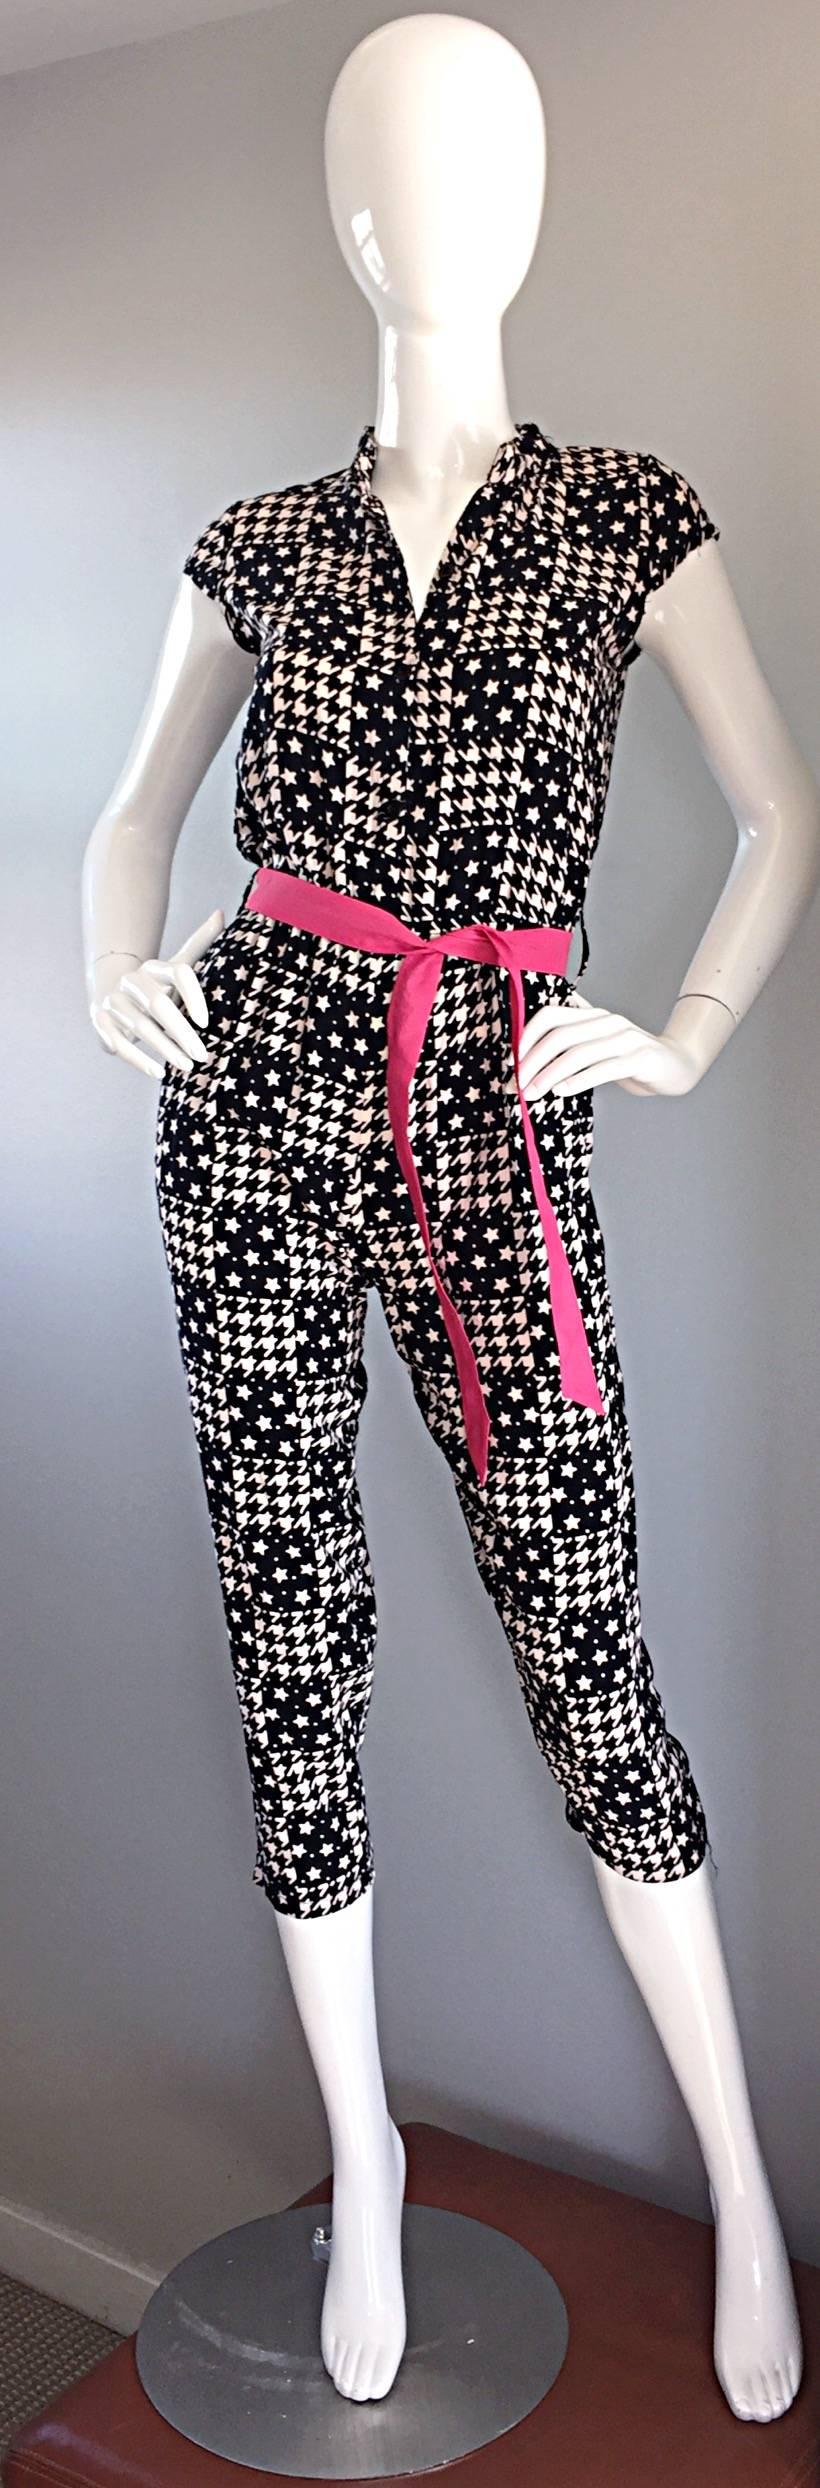 Black Amazing Vintage 80s Houndstooth and Star Print Navy White Jumpsuit w/ Pink Belt For Sale